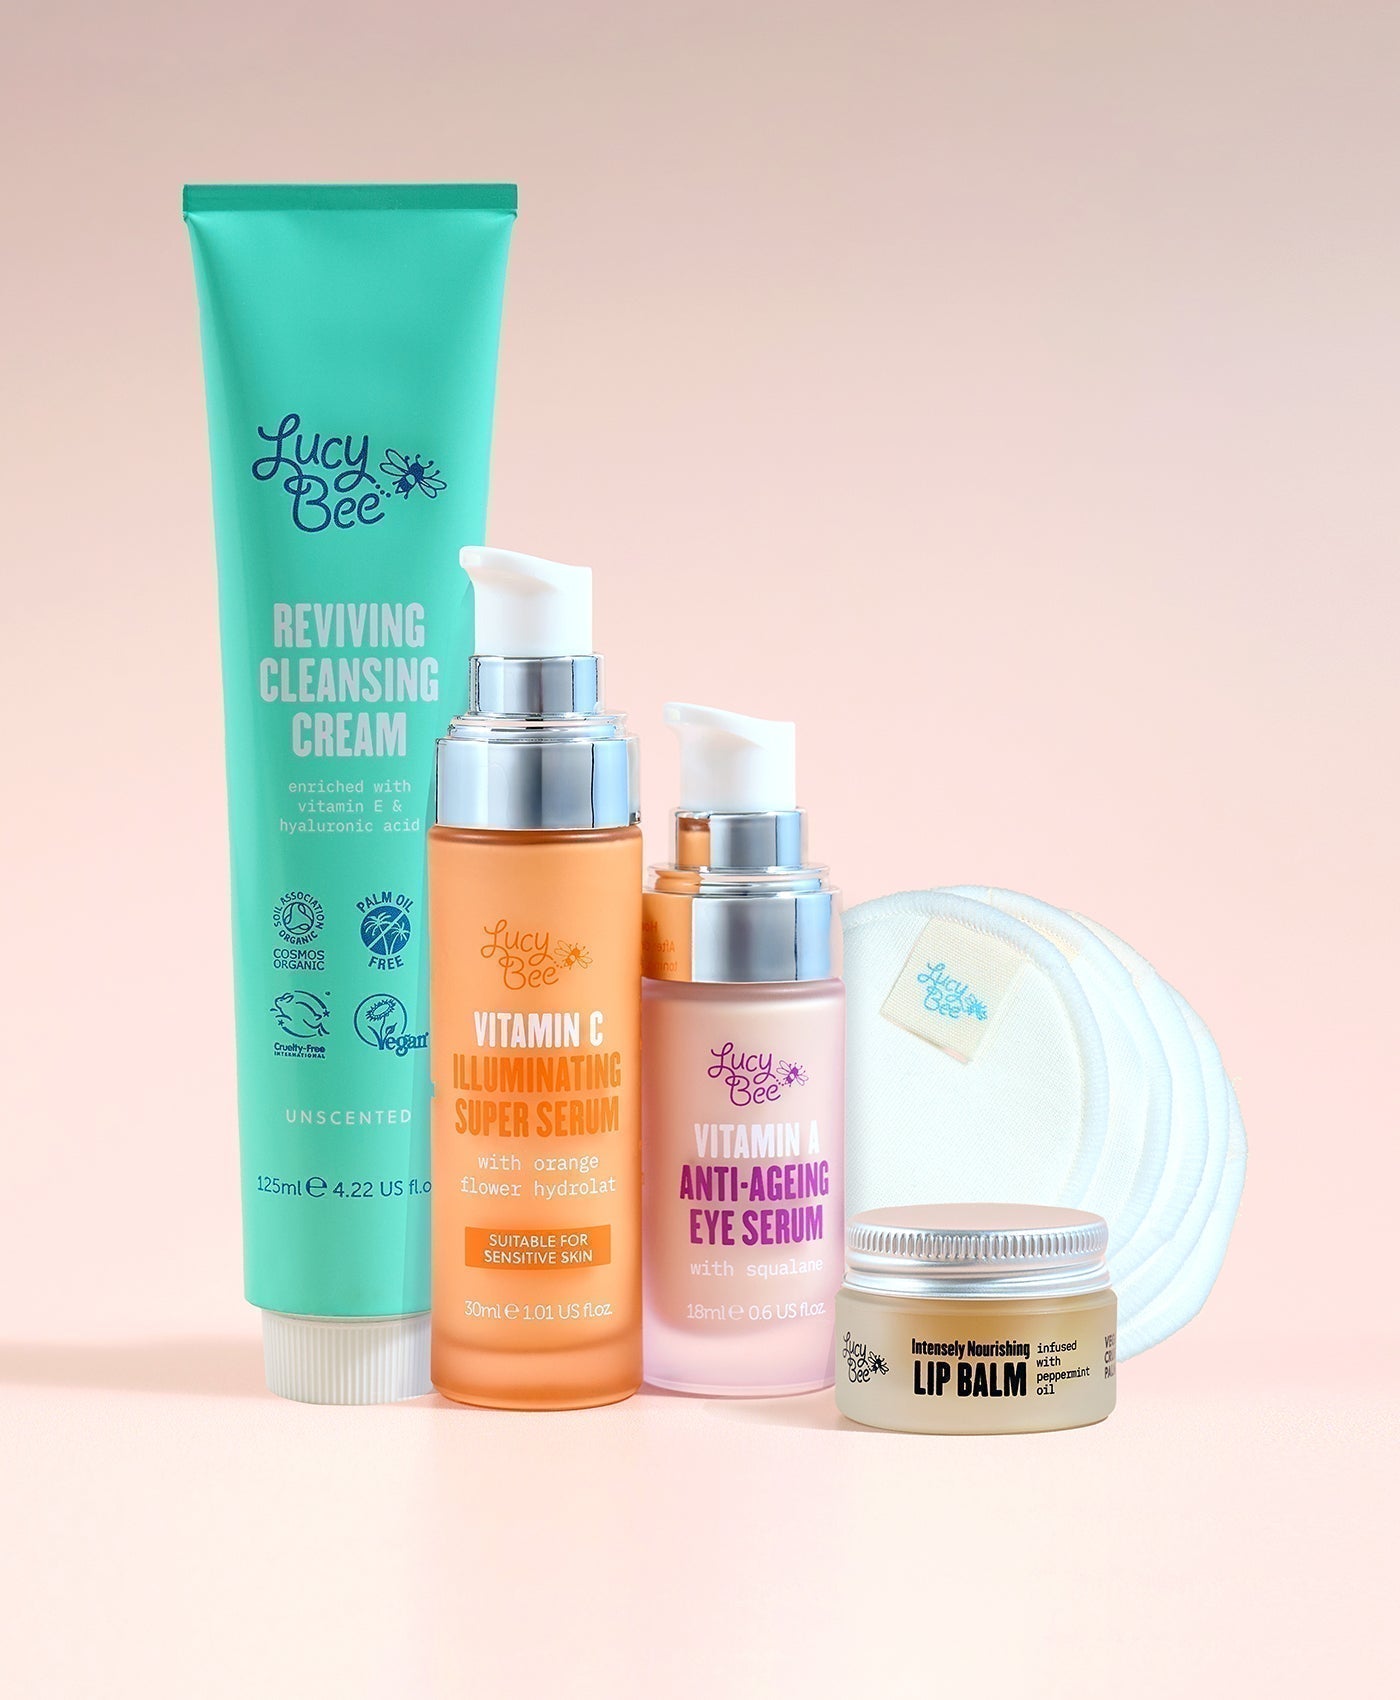 Anti-Ageing Skincare from Lucy Bee